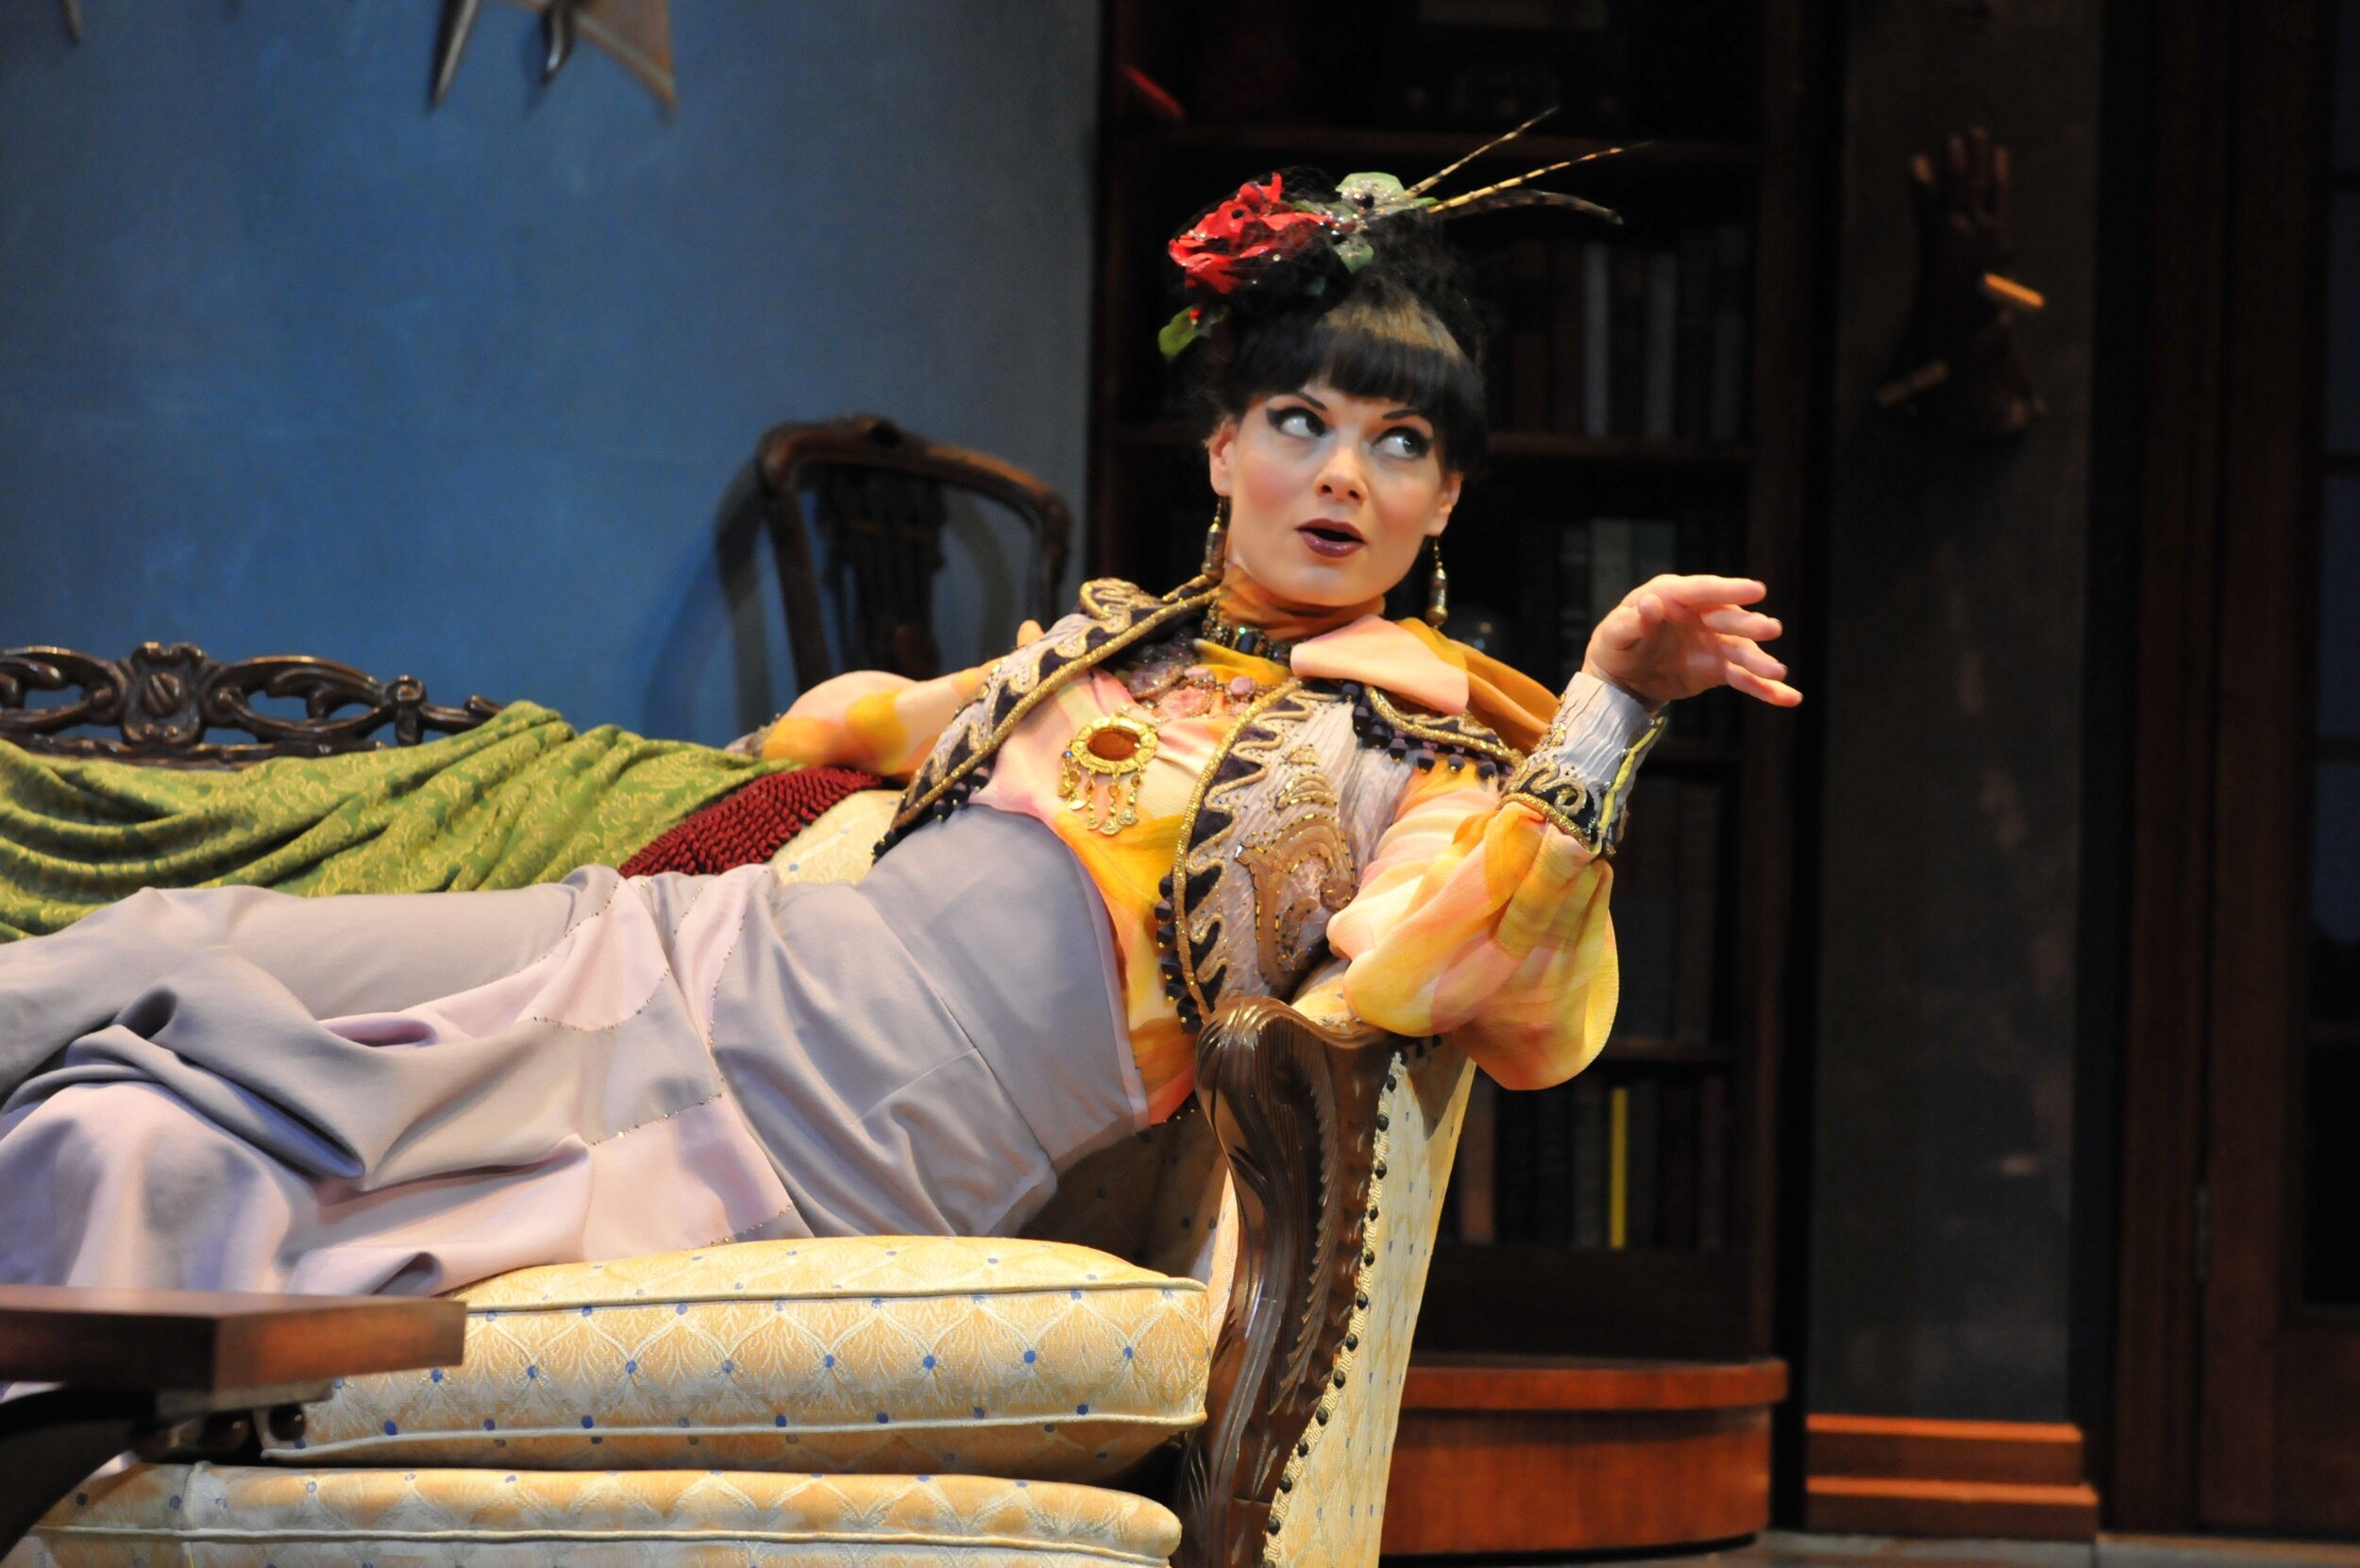  Gail Rastorfer plays a vicious theater critic and gossip in "The Game's Afoot.' Photo: BARBARA BANKS  